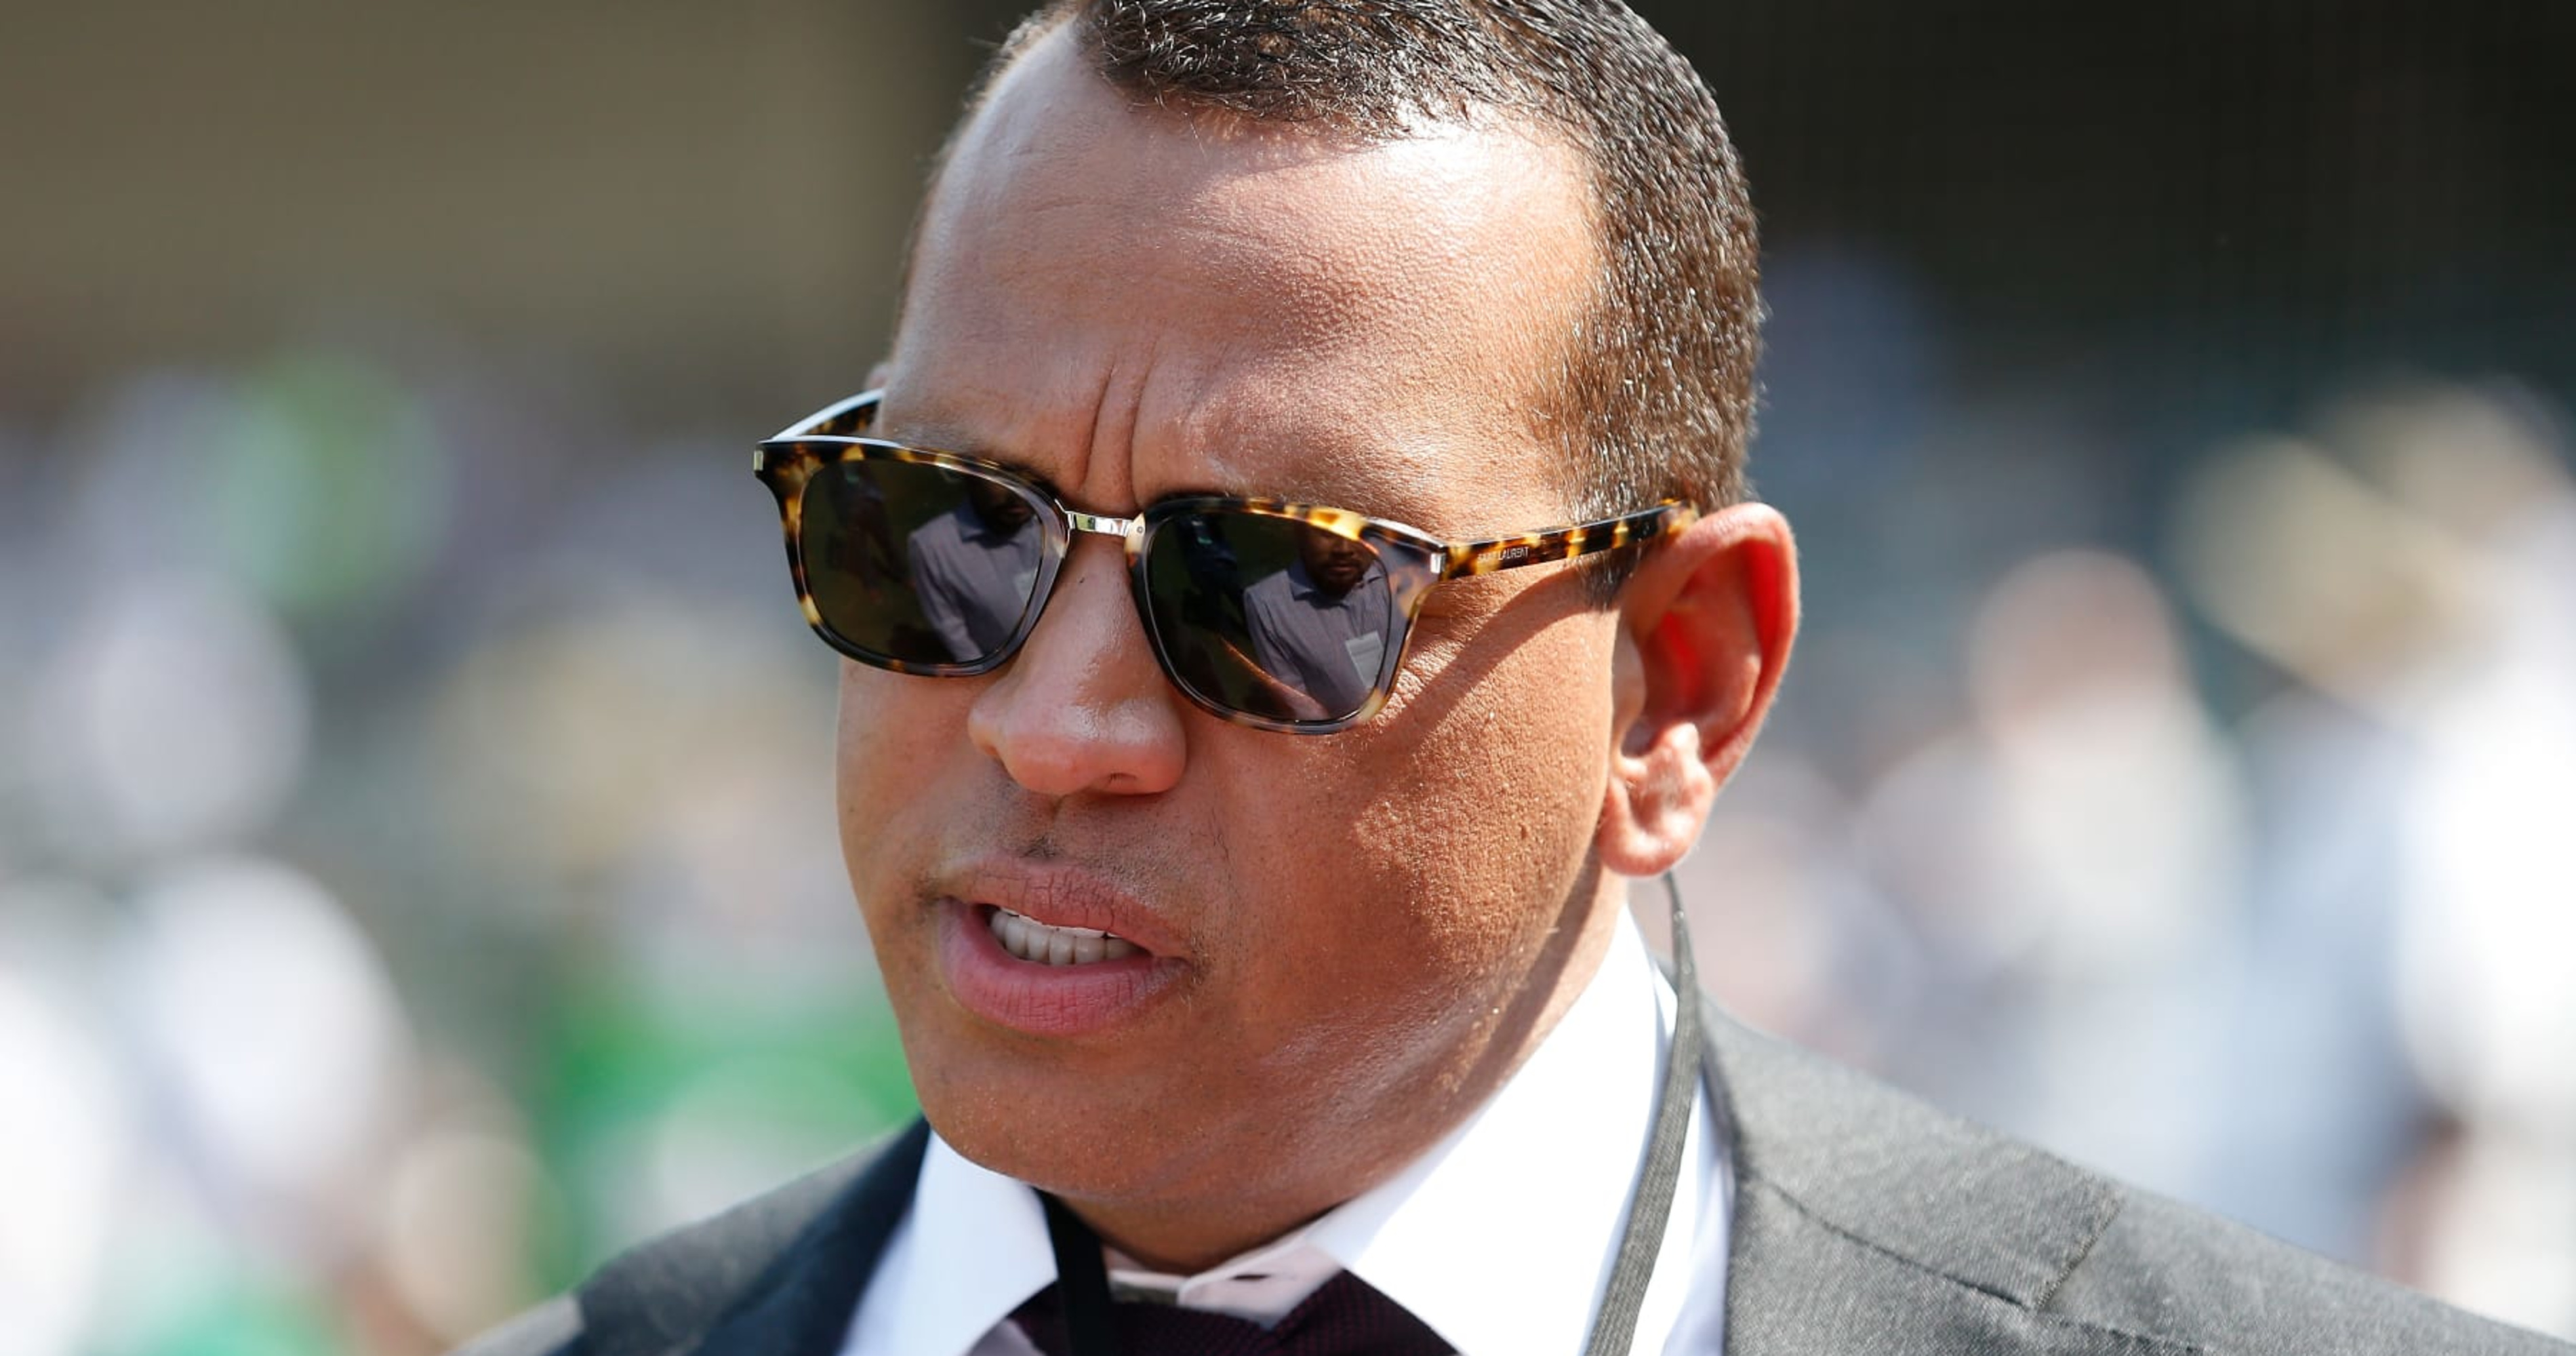 A-Rod: 'It bothers me' Yankees haven't retired my number